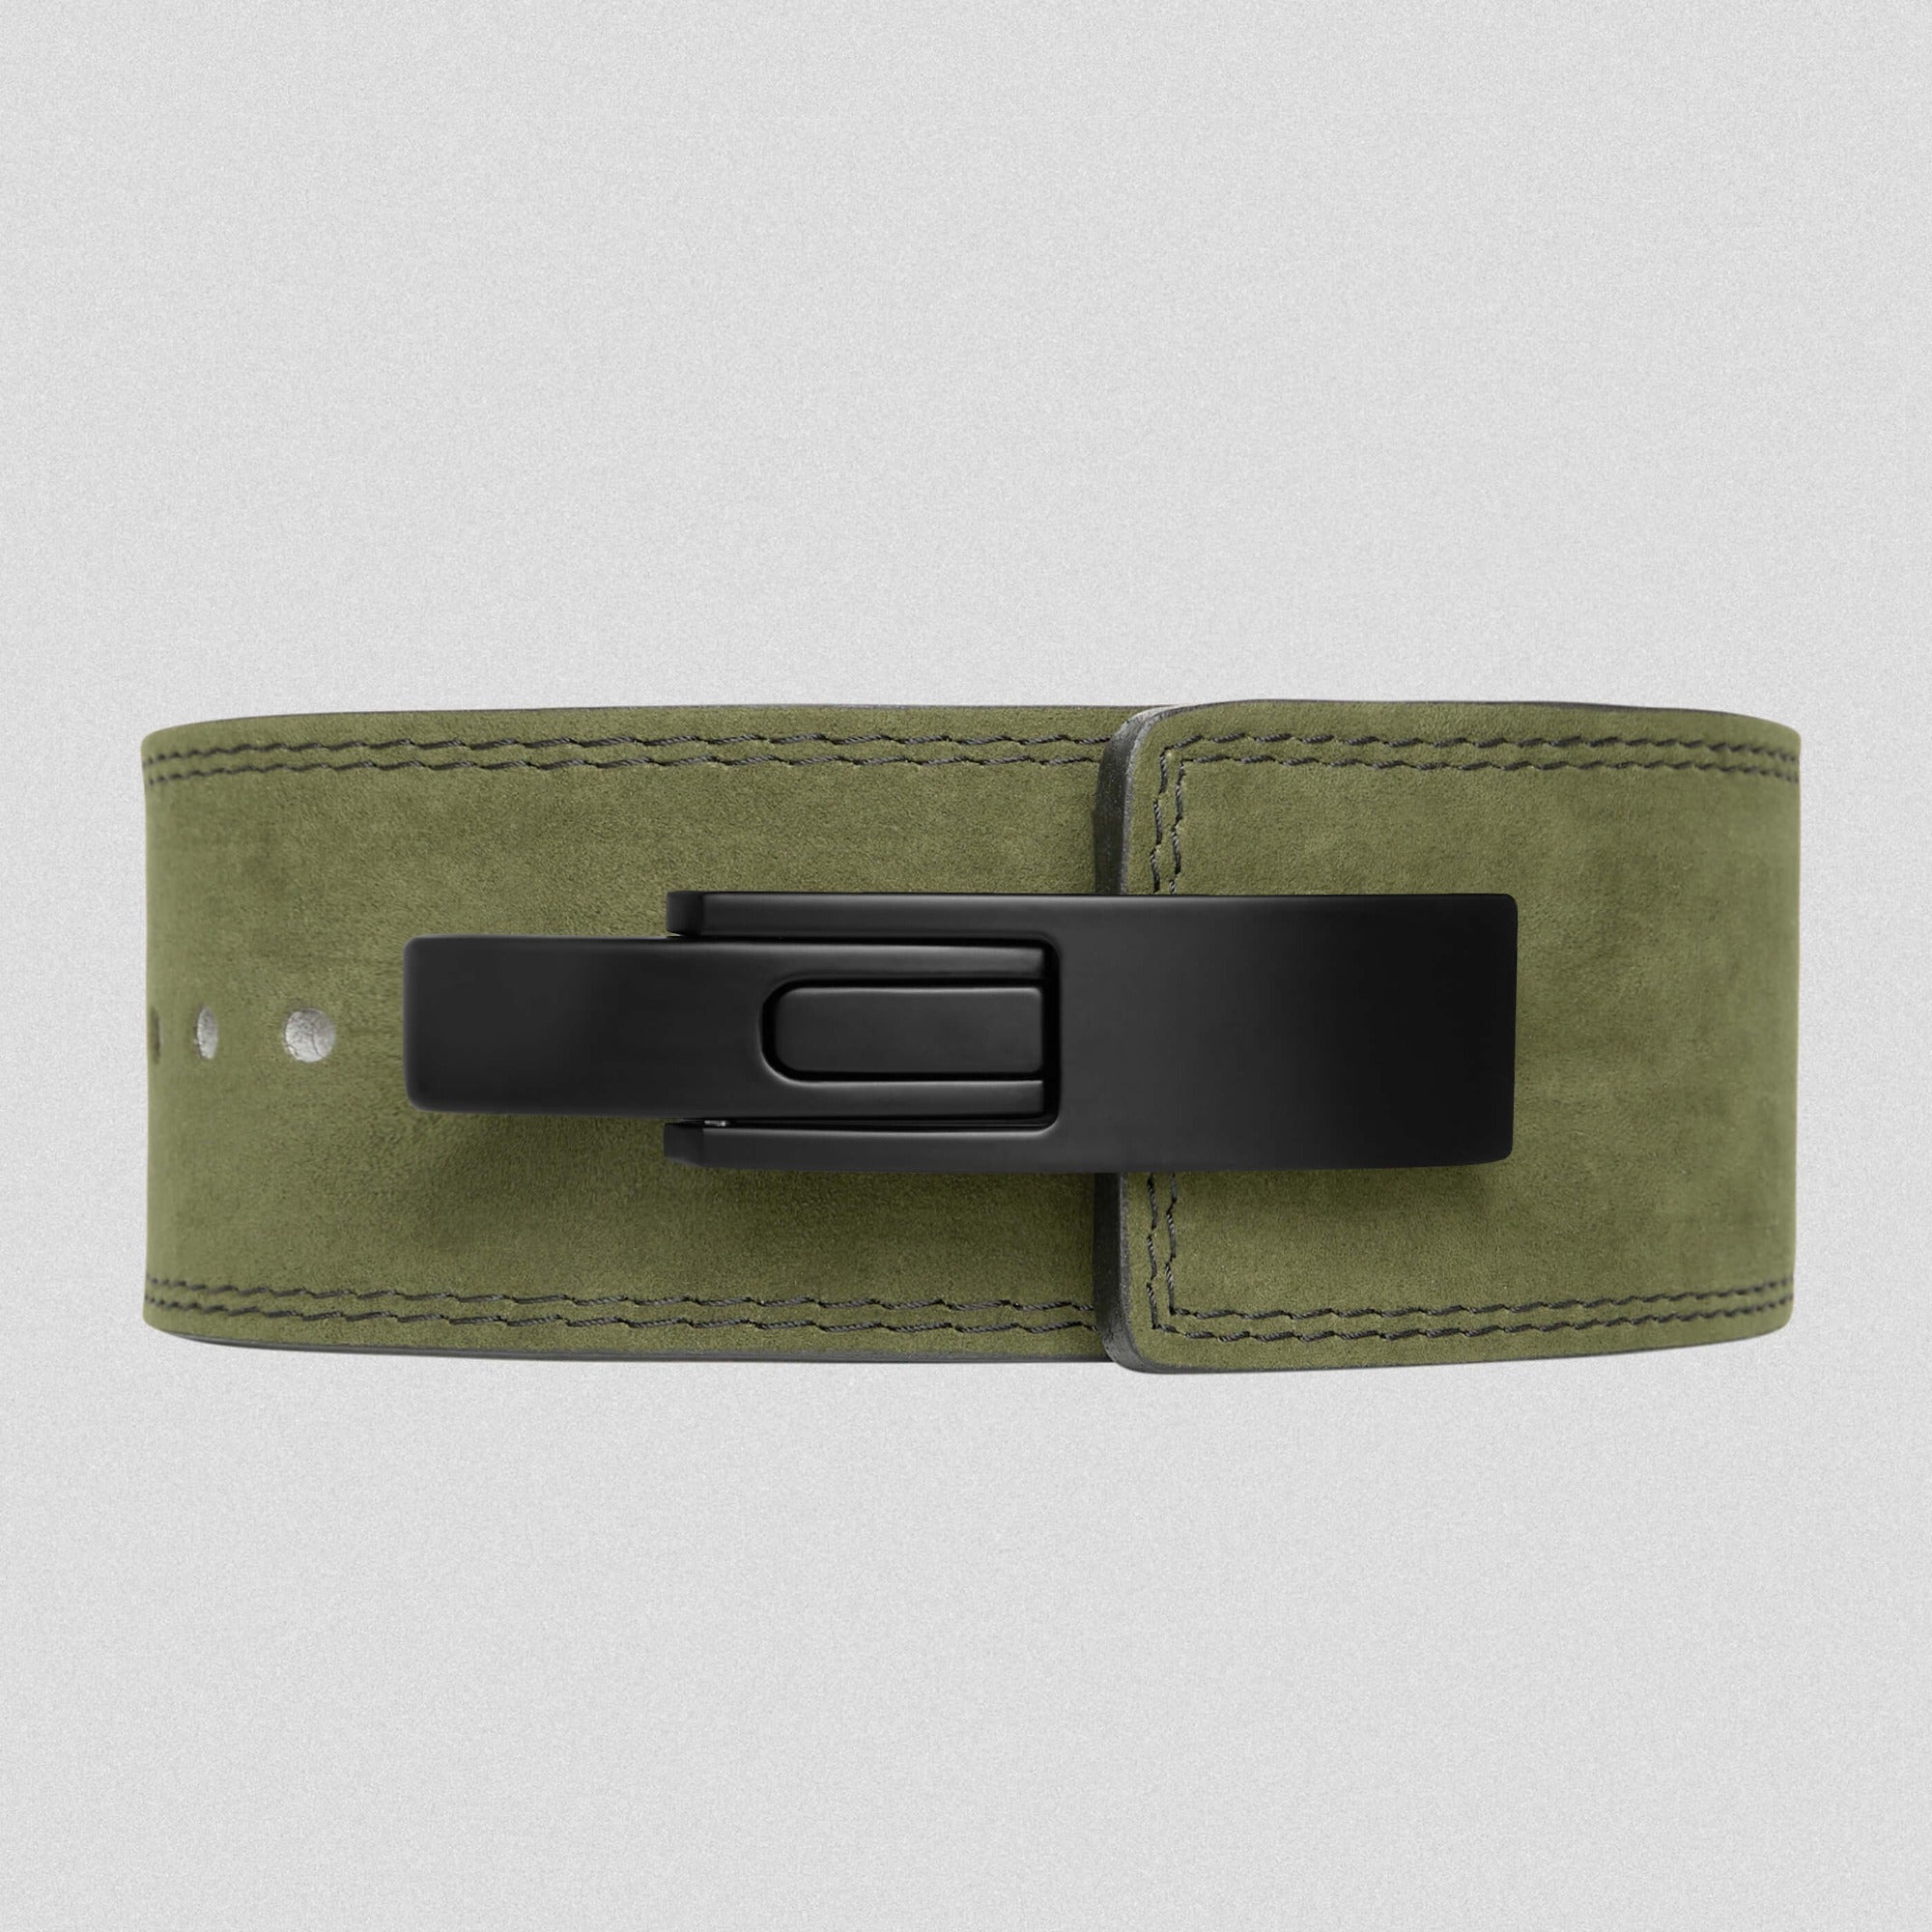 10mm belt military green front